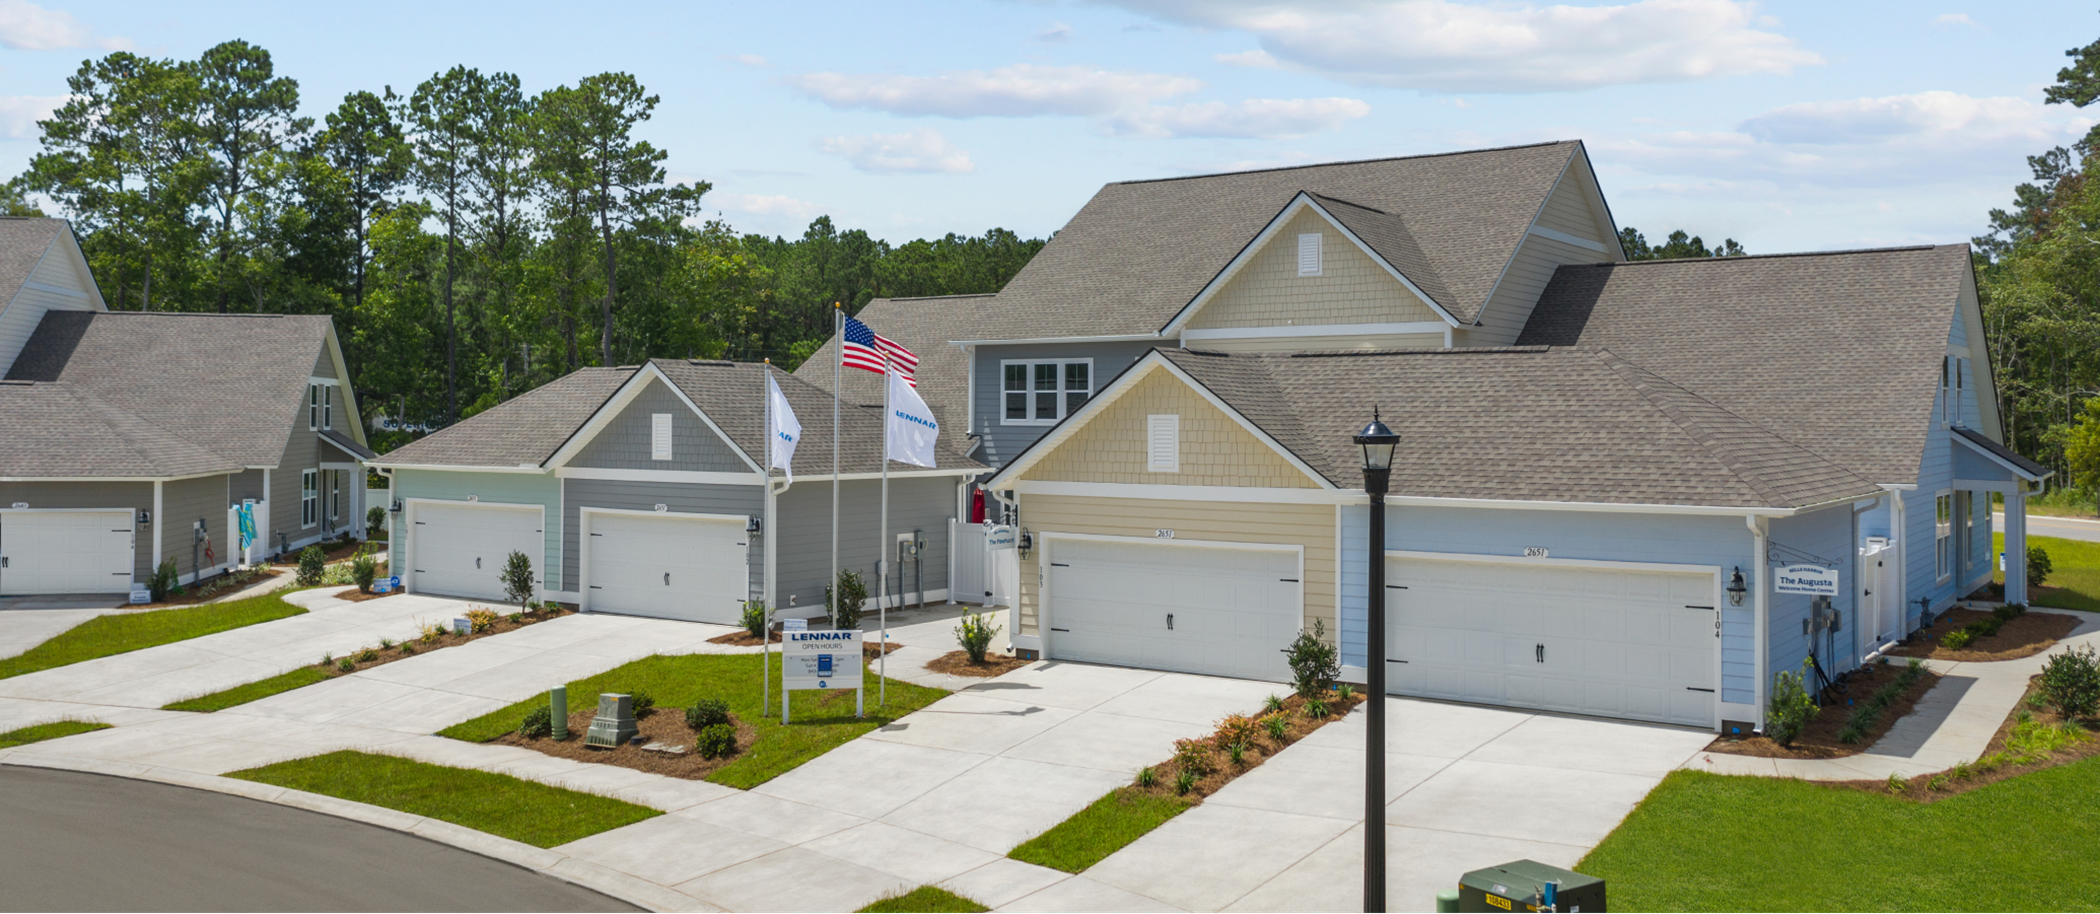 CRS_The Preserve at Pine Lakes Townhomes Streetscape